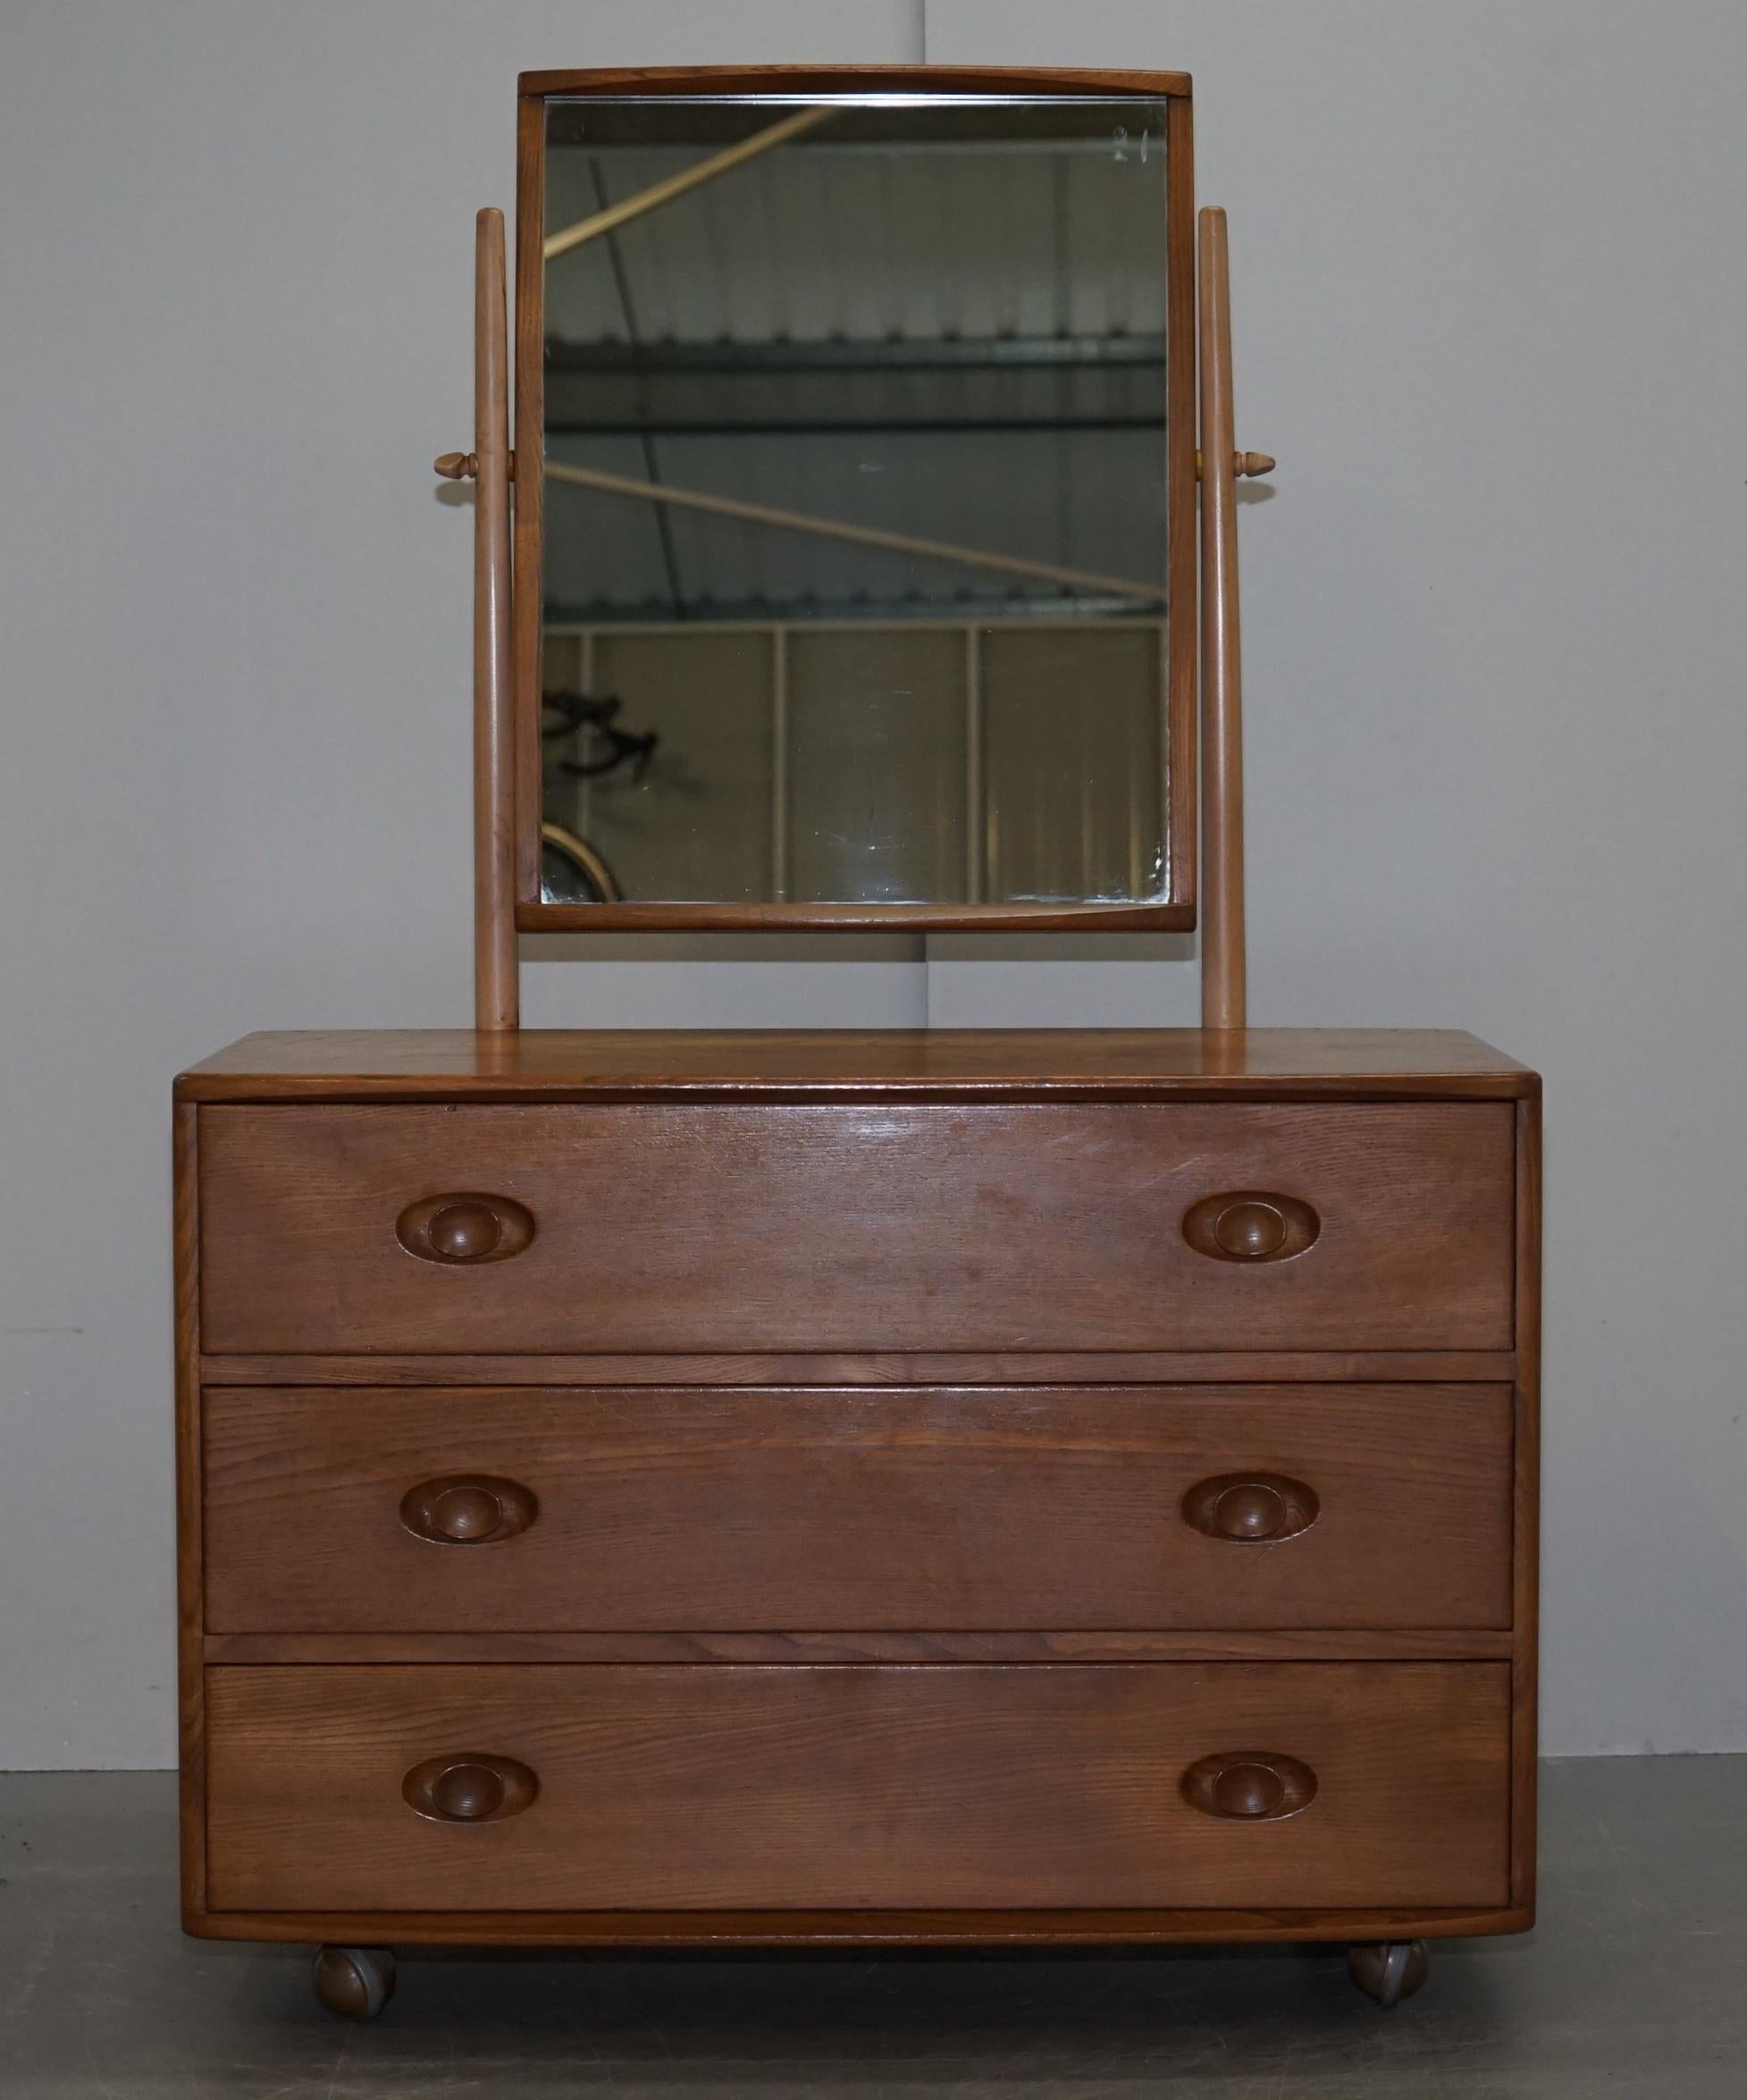 We are delighted to offer for sale this lovely 1960s Ercol G Plan blond wood elm dressing table chest of drawers with mirror

This piece is part of a suite of Ercol furniture I have recently purchased, I have the wardrobe, mirror top drawers or